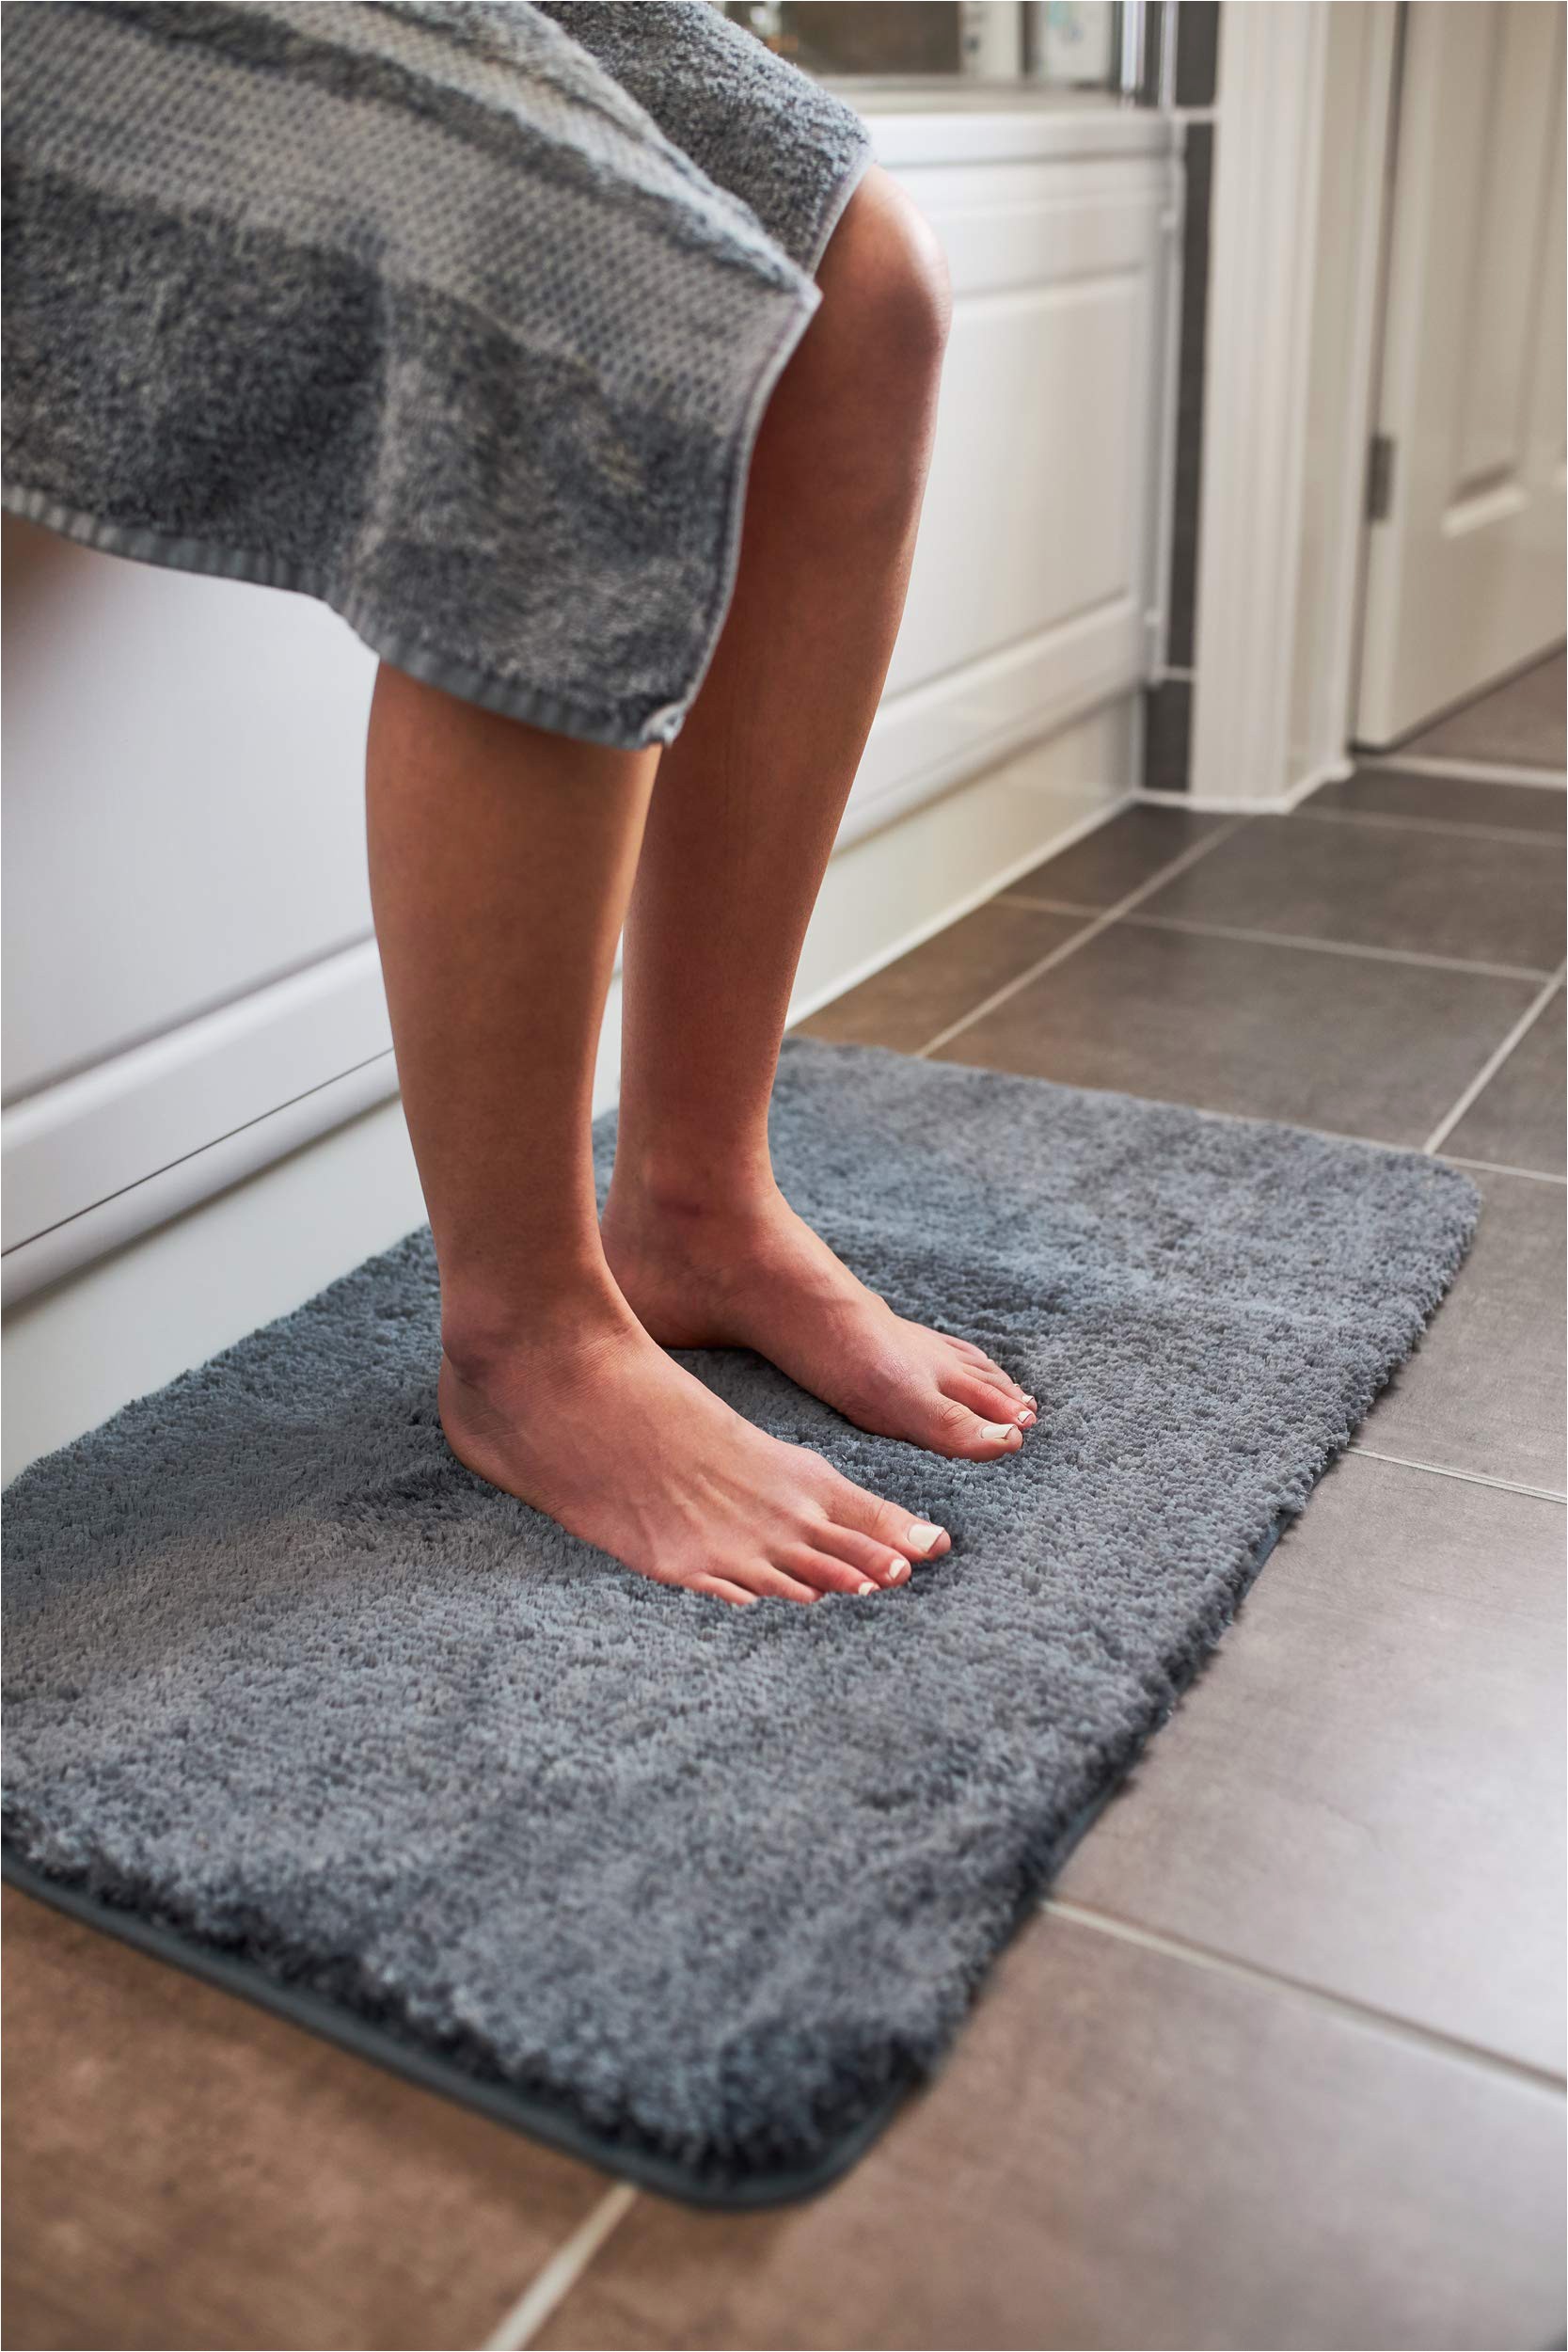 Best Rated Bathroom Rugs Luxury Grey Bath Mat Microfiber Non Slip Bath Rug with Super soft Absorbent Dry Fast Design for Bath and Shower